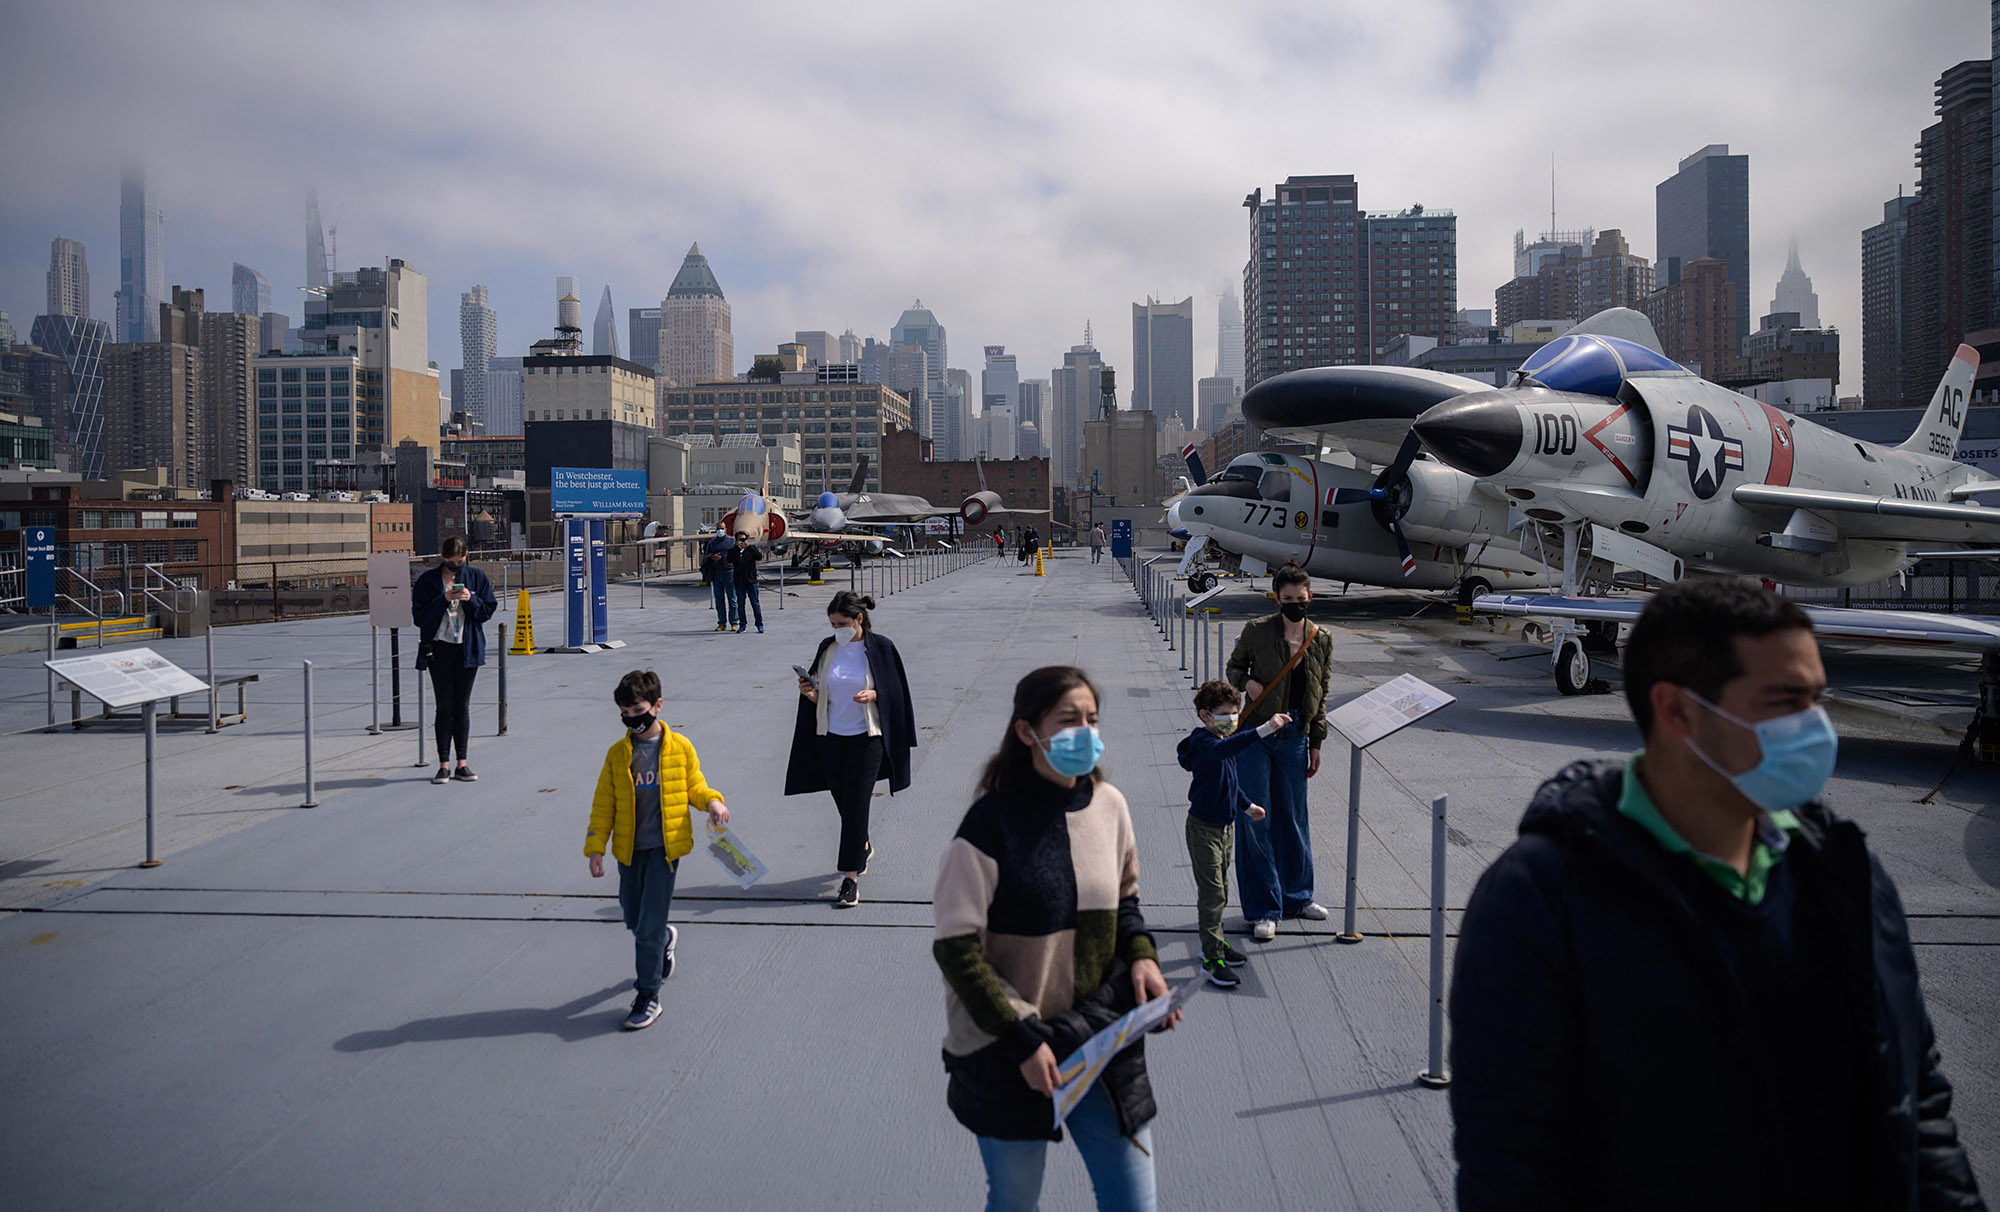 Visitors walk past exhibits at the USS Intrepid Sea Air and Space museum after it re-opened following closure due to the pandemic, in New York on March 25.